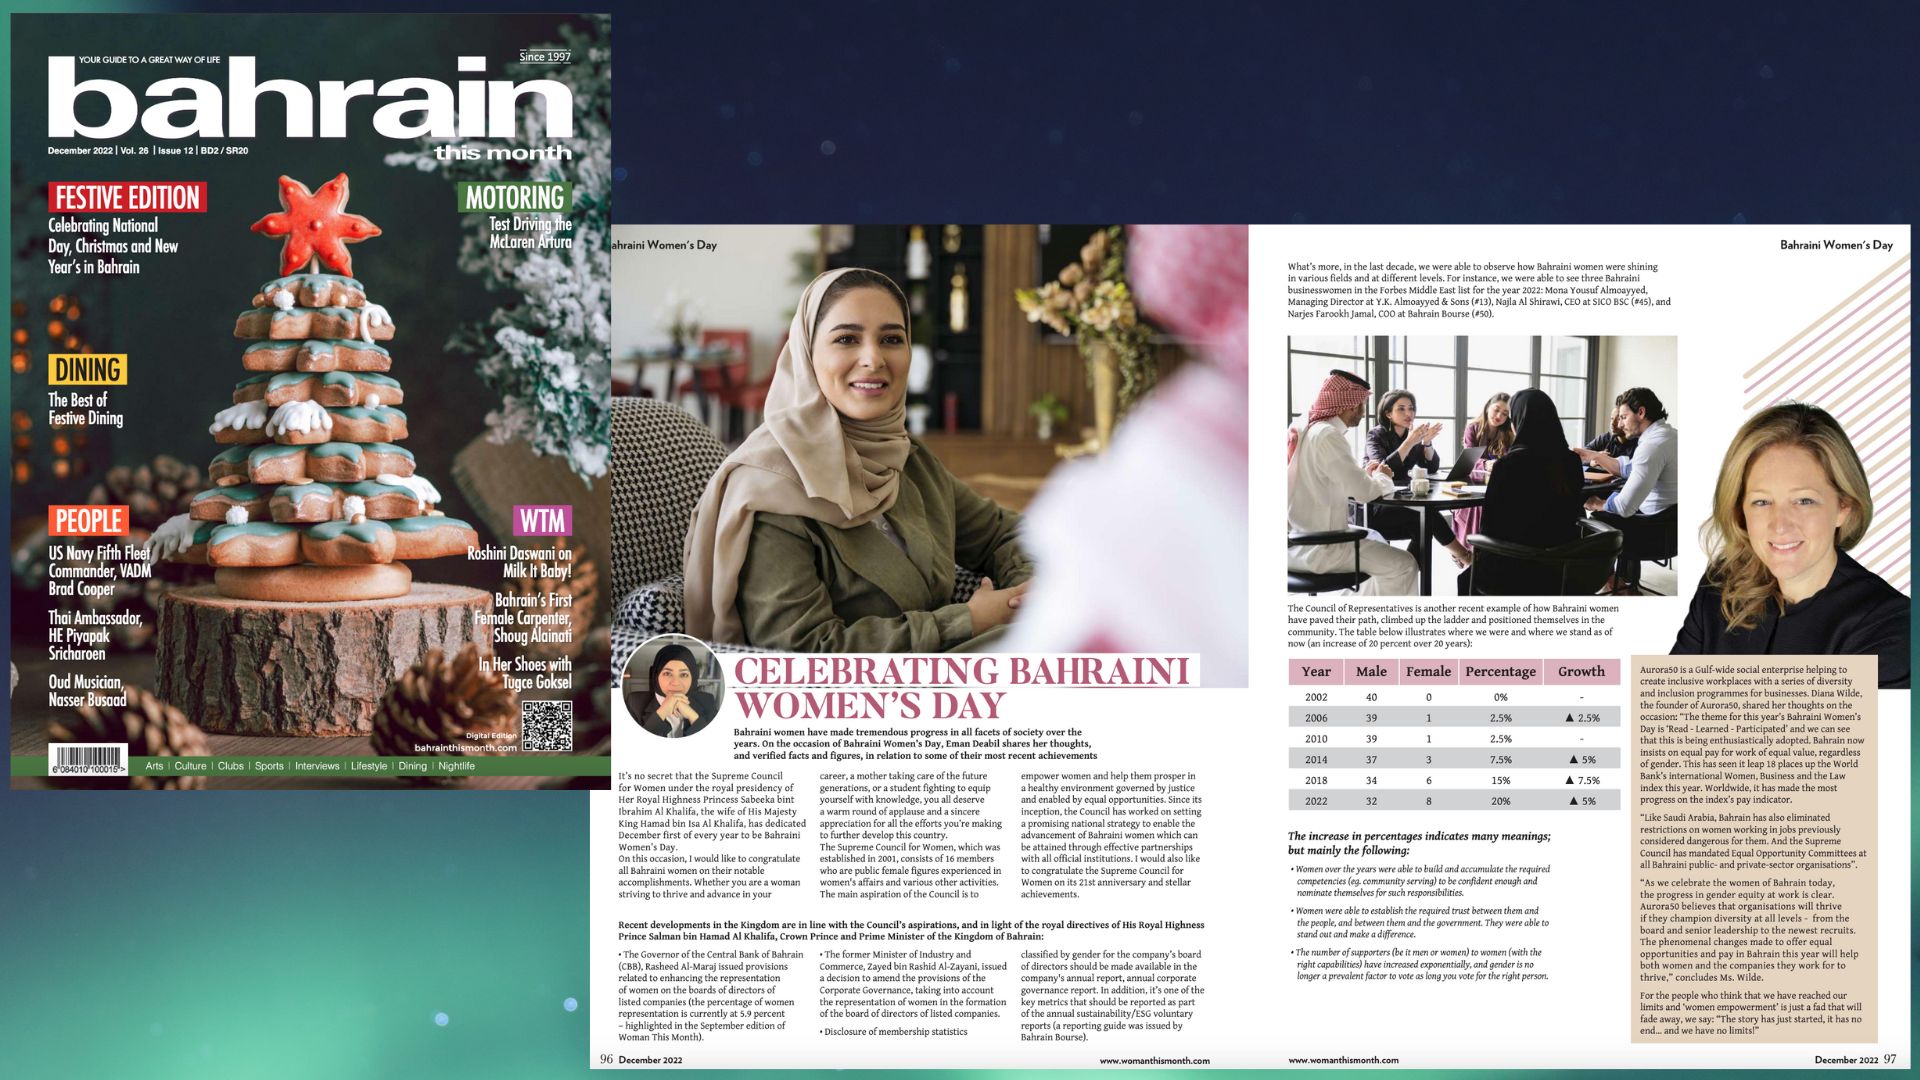 Aurora50 In the media - screenshot of Bahrain This Month (December 2022 issue) - Bahraini Women's Day feature with Diana Wilde comment